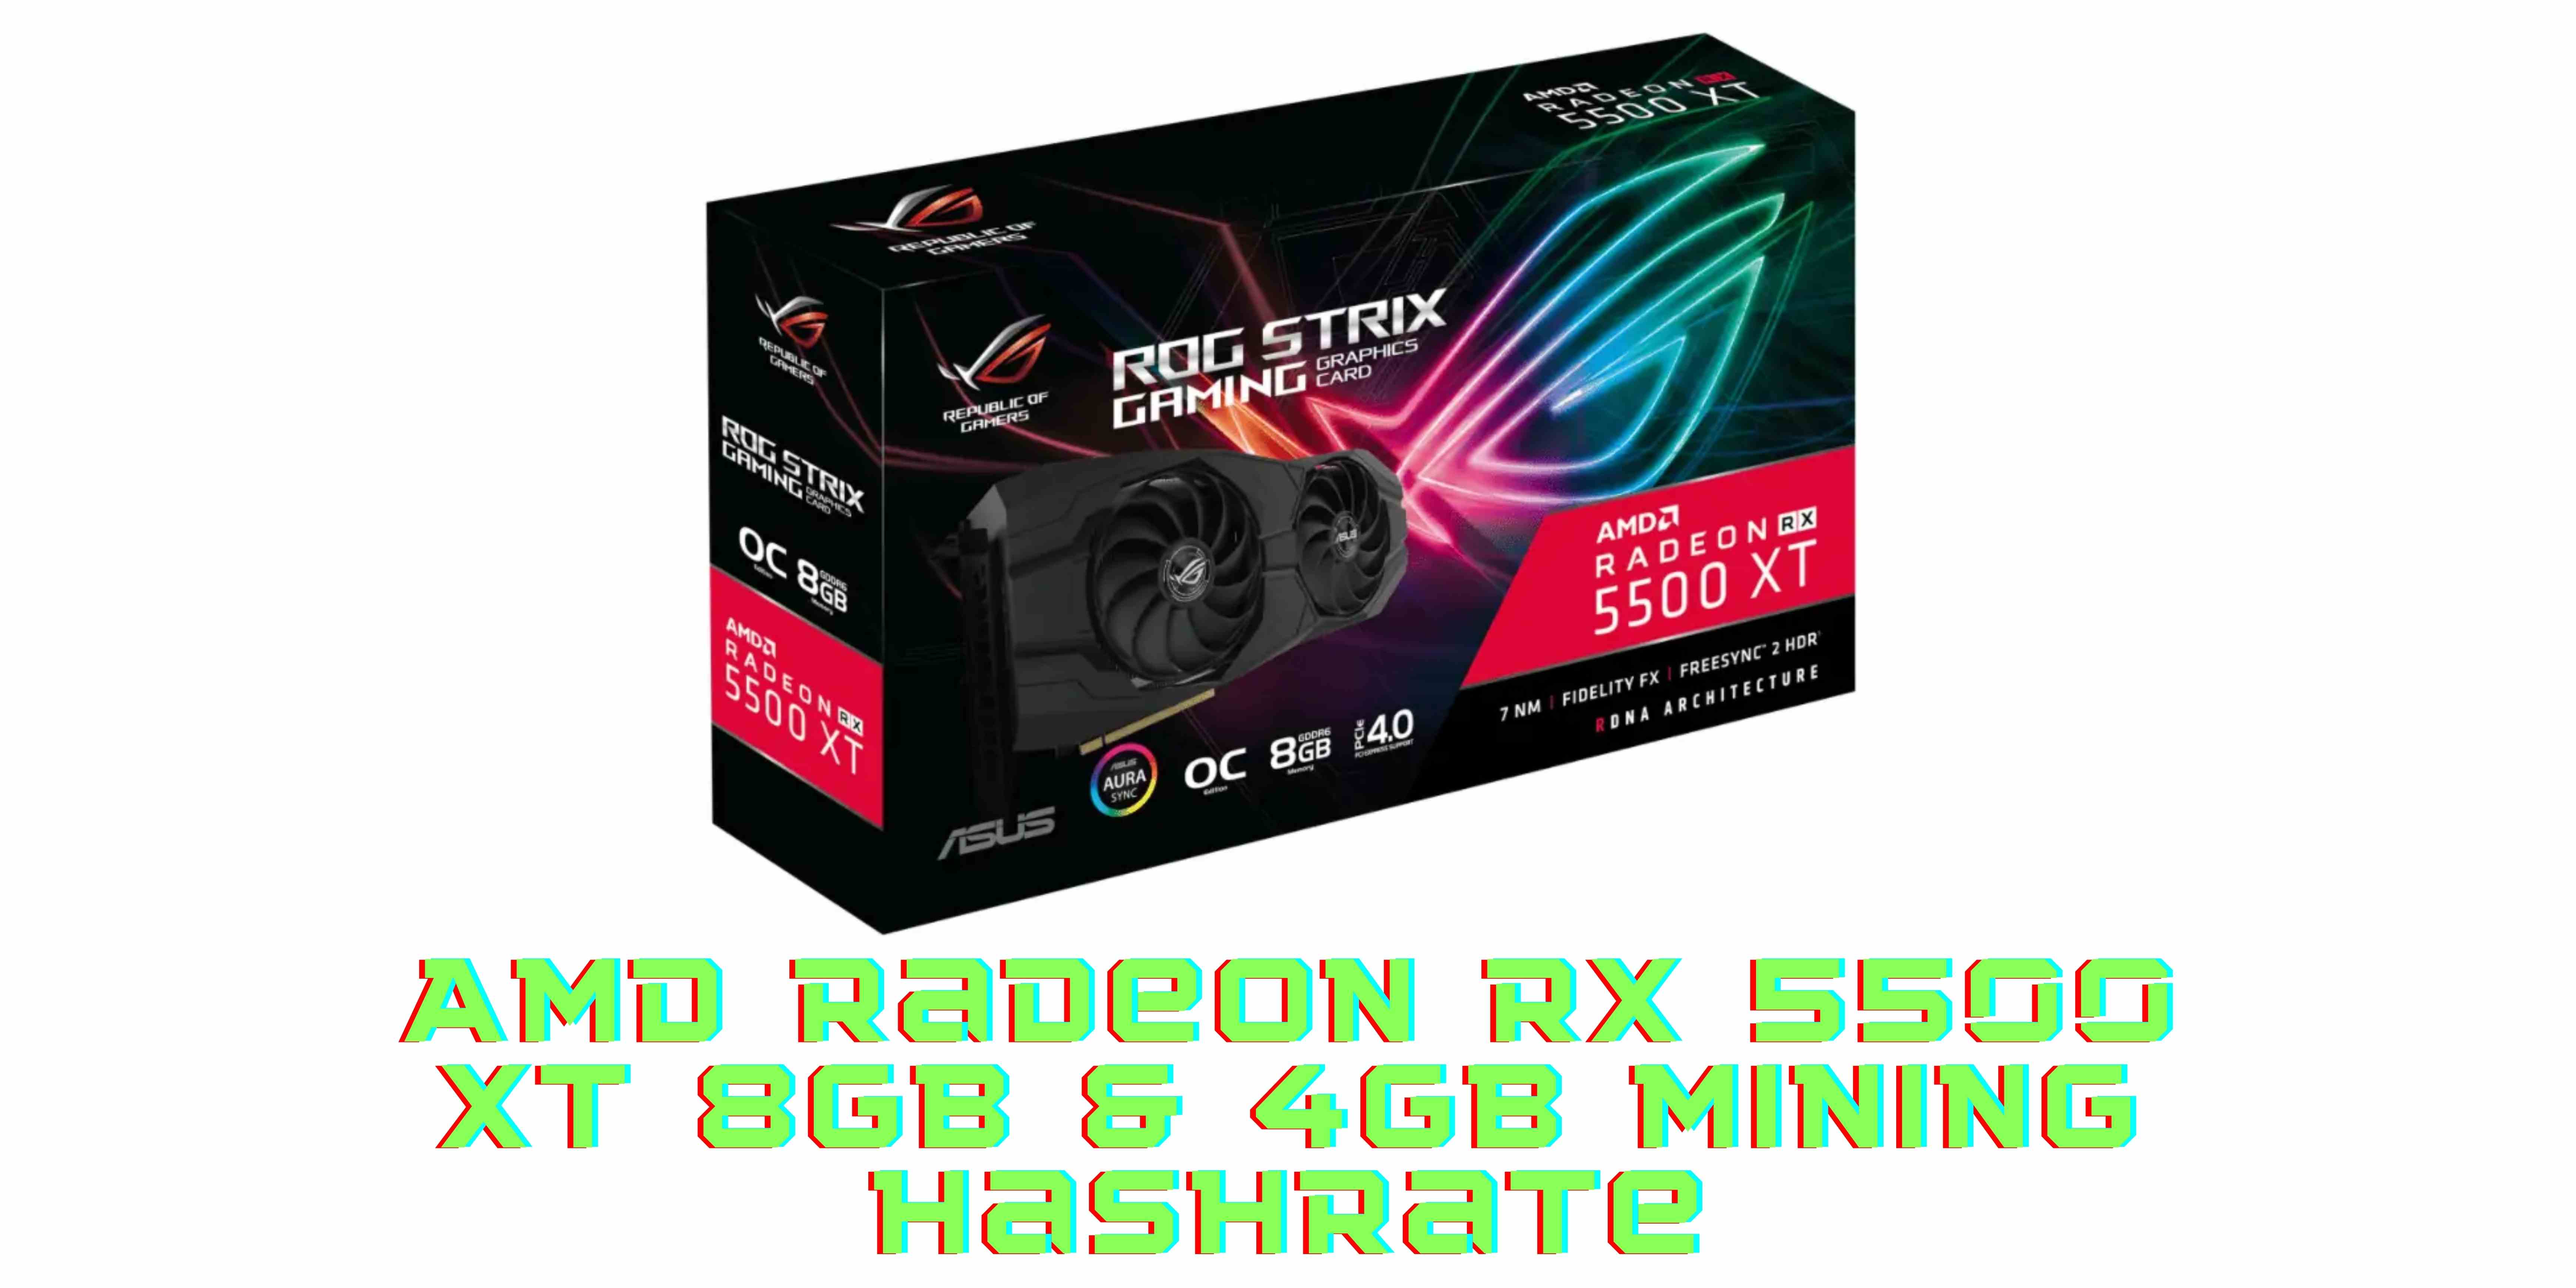 Is The AMD Radeon RX 5500 XT Good For Mining Or Gaming? AMD Radeon RX 5500 XT 8GB & 4GB Mining Hashrate Review